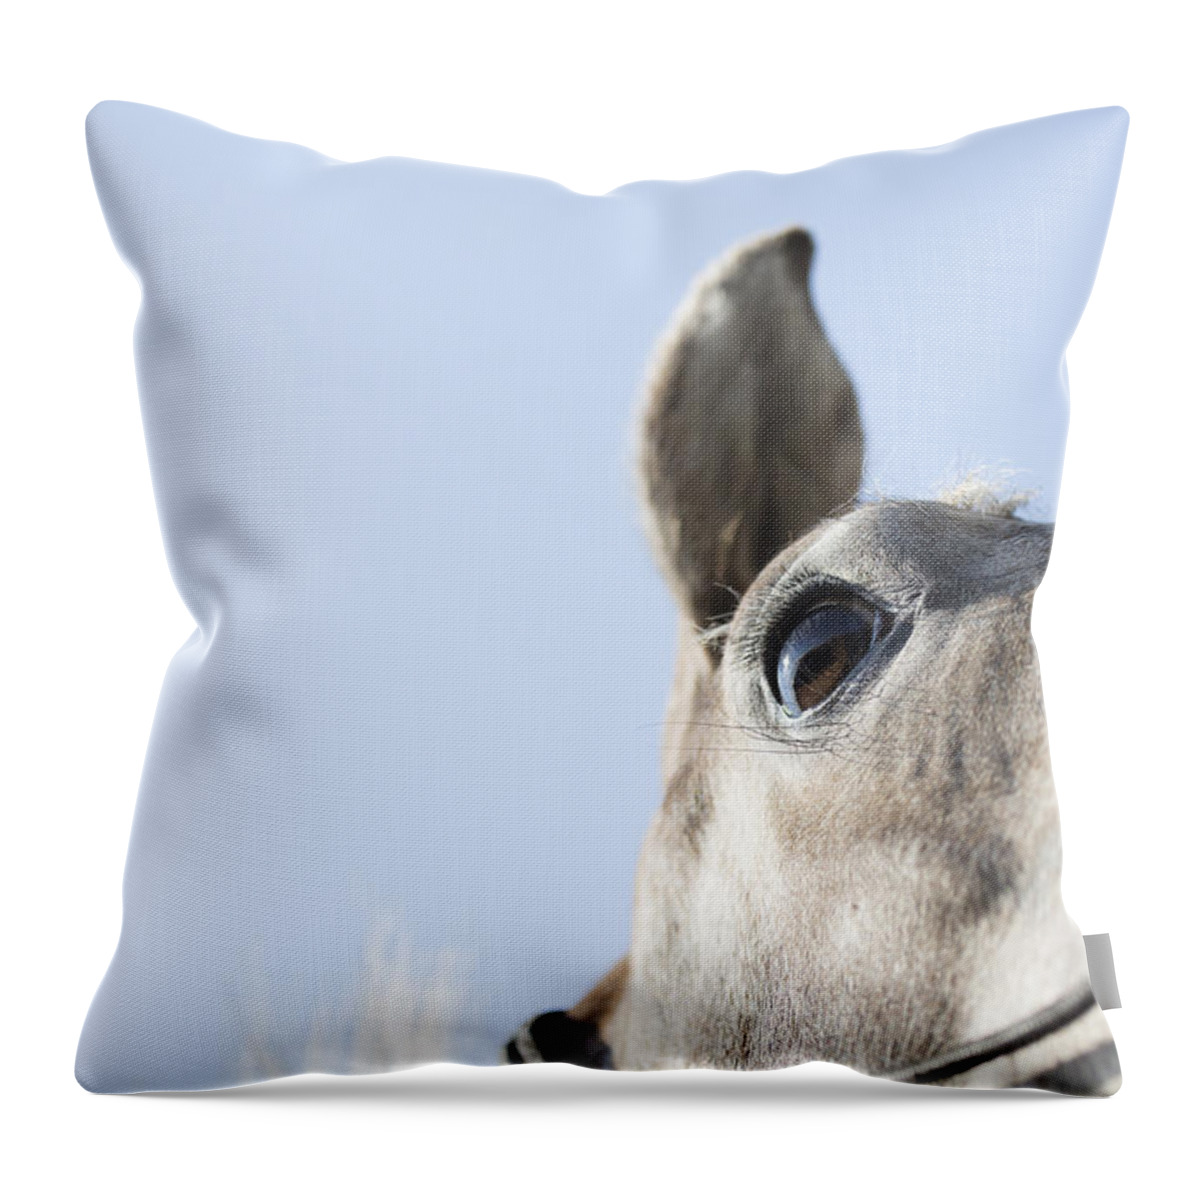 Horse Throw Pillow featuring the photograph Close-up by Caitlyn Grasso